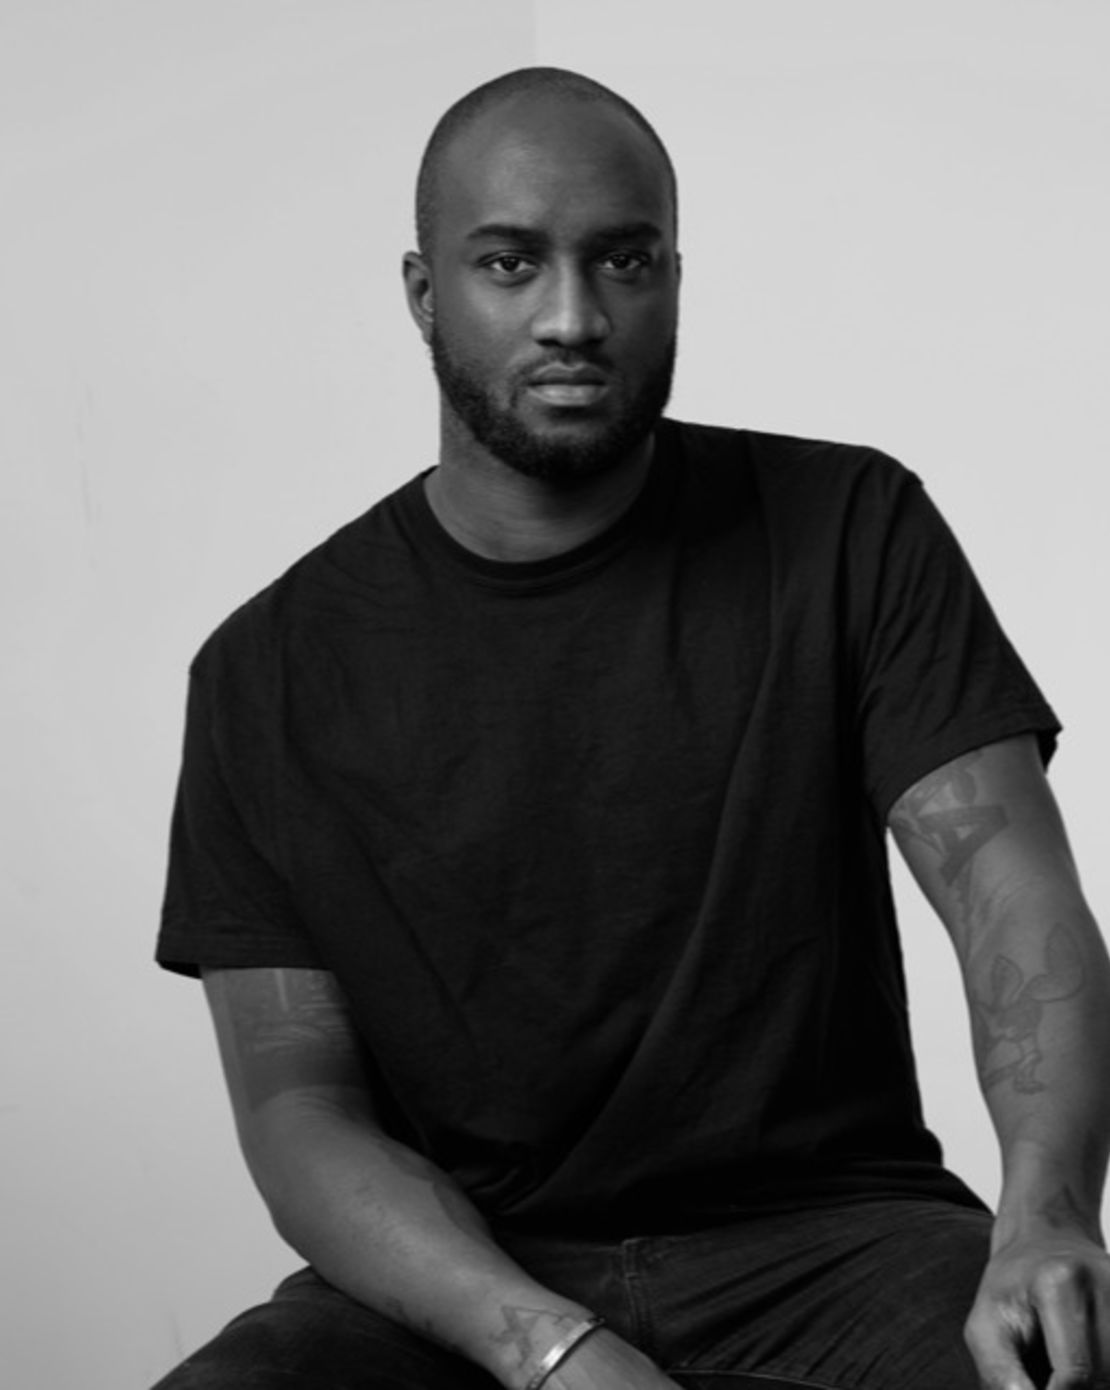 Op-ed: Virgil Abloh dissolved 'barriers of entry' with joy and